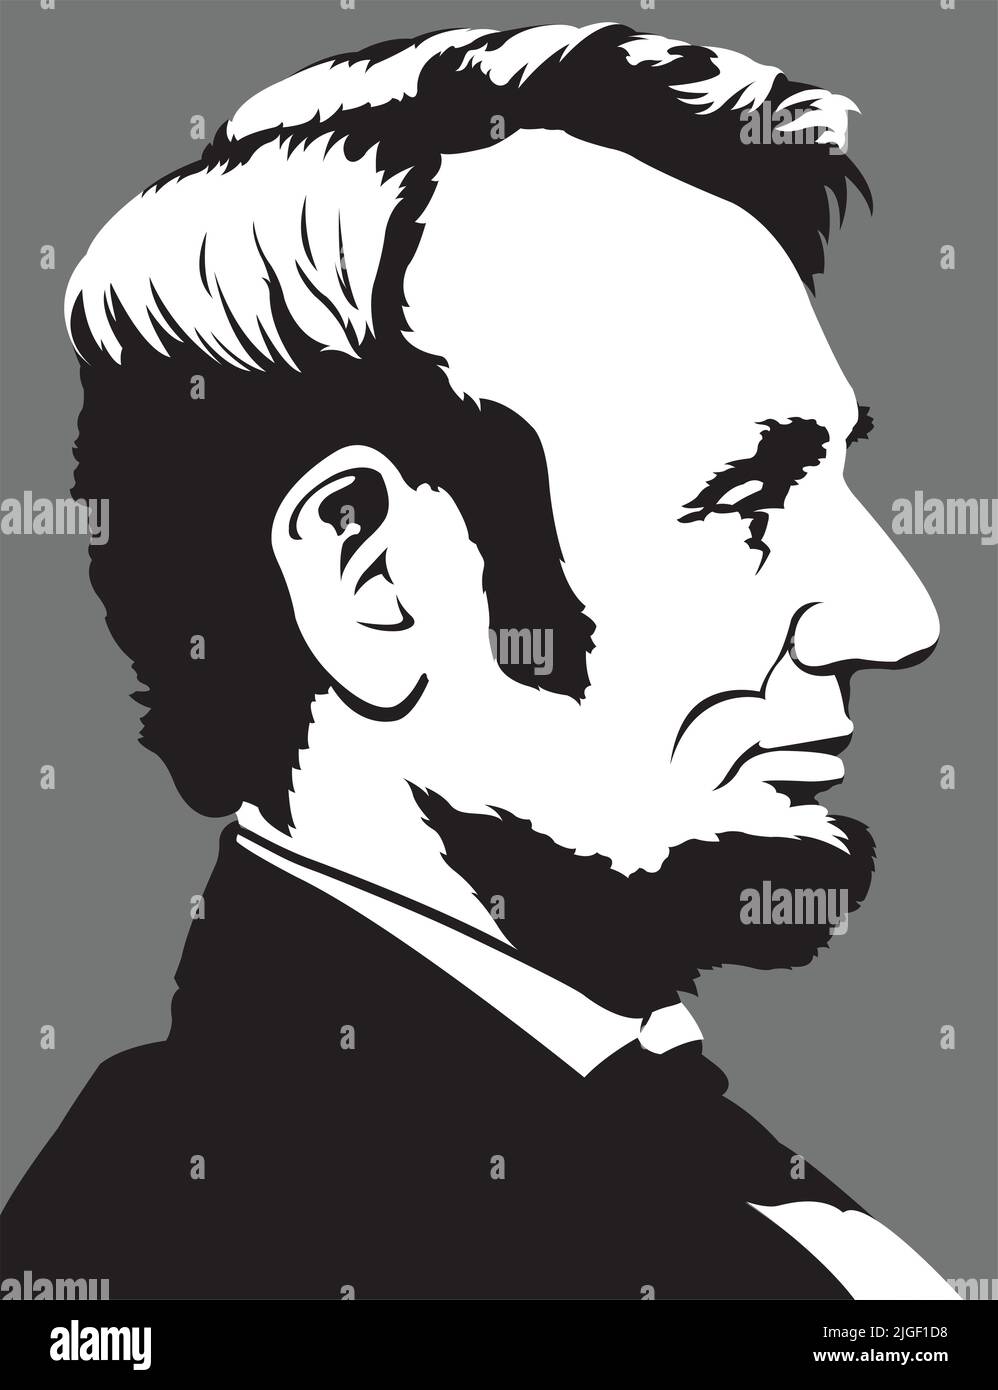 A vector portrait of the 16th President of the United States Abraham Lincoln in profile view. Stock Vector